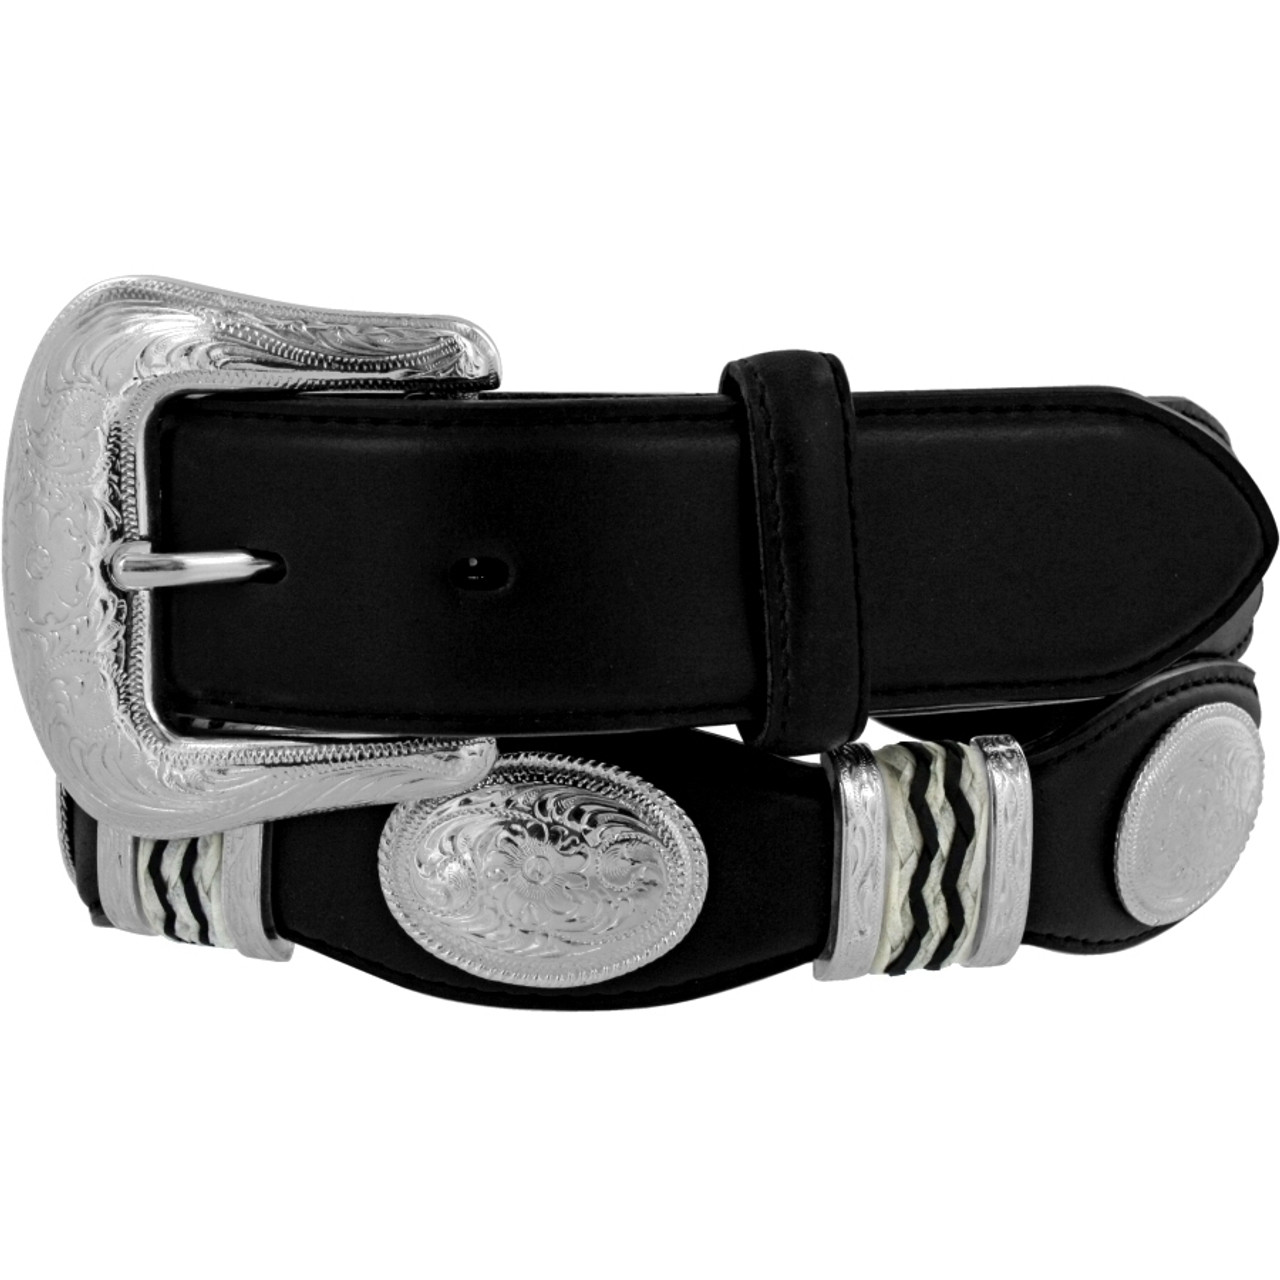 Twisted Black Leather Belt with Silver Buckle